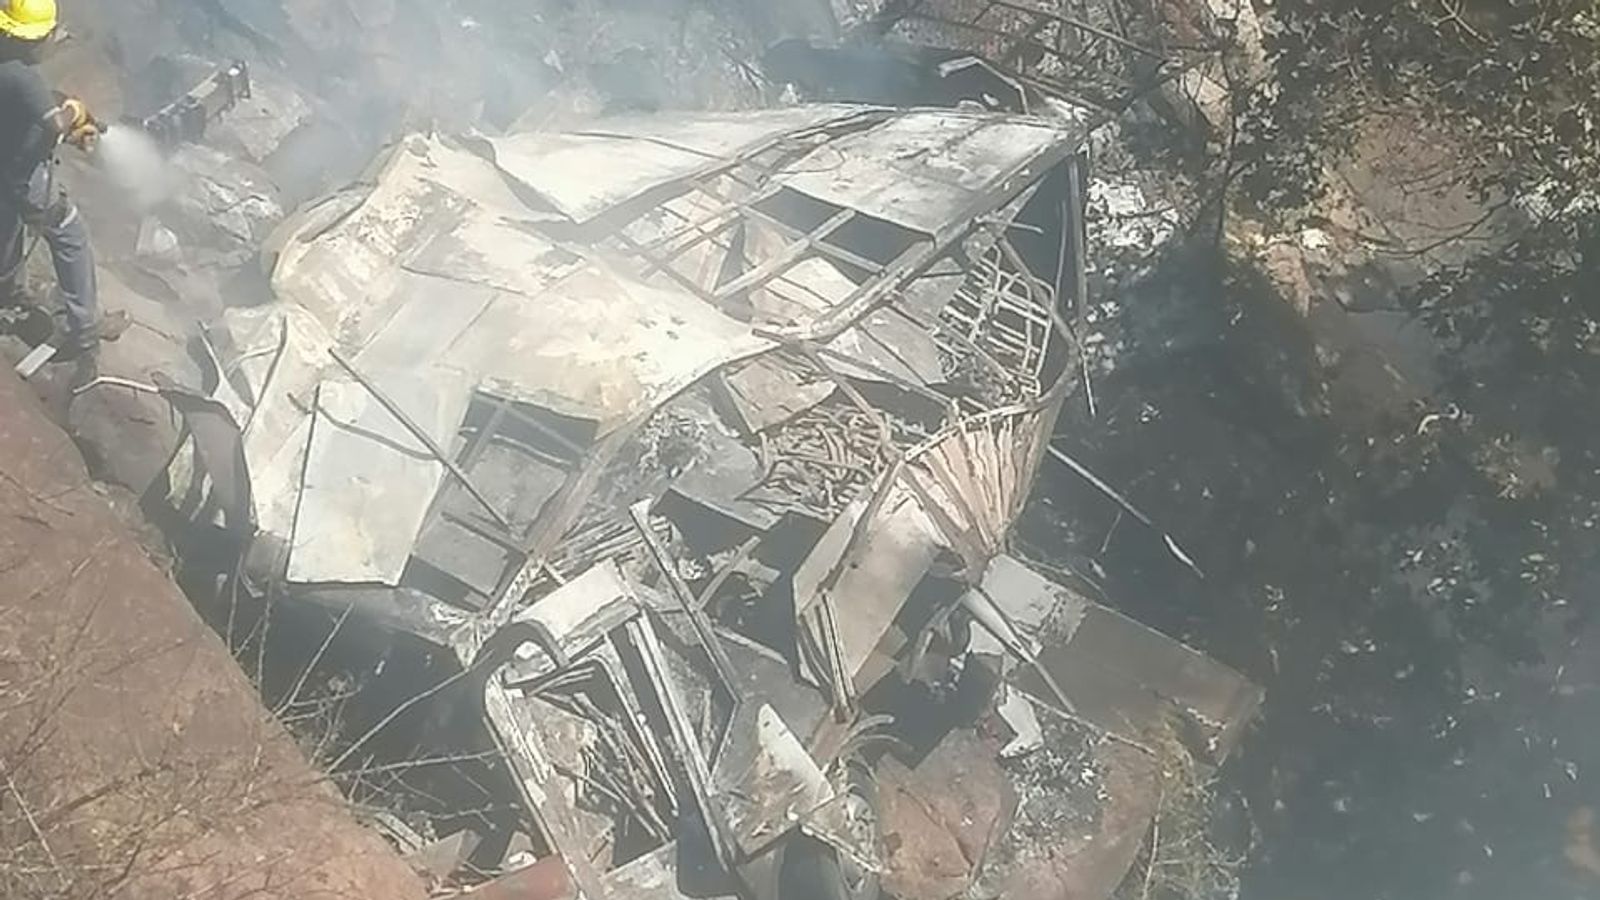 45 people killed in bus crash in South Africa – girl, 8, the sole survivor